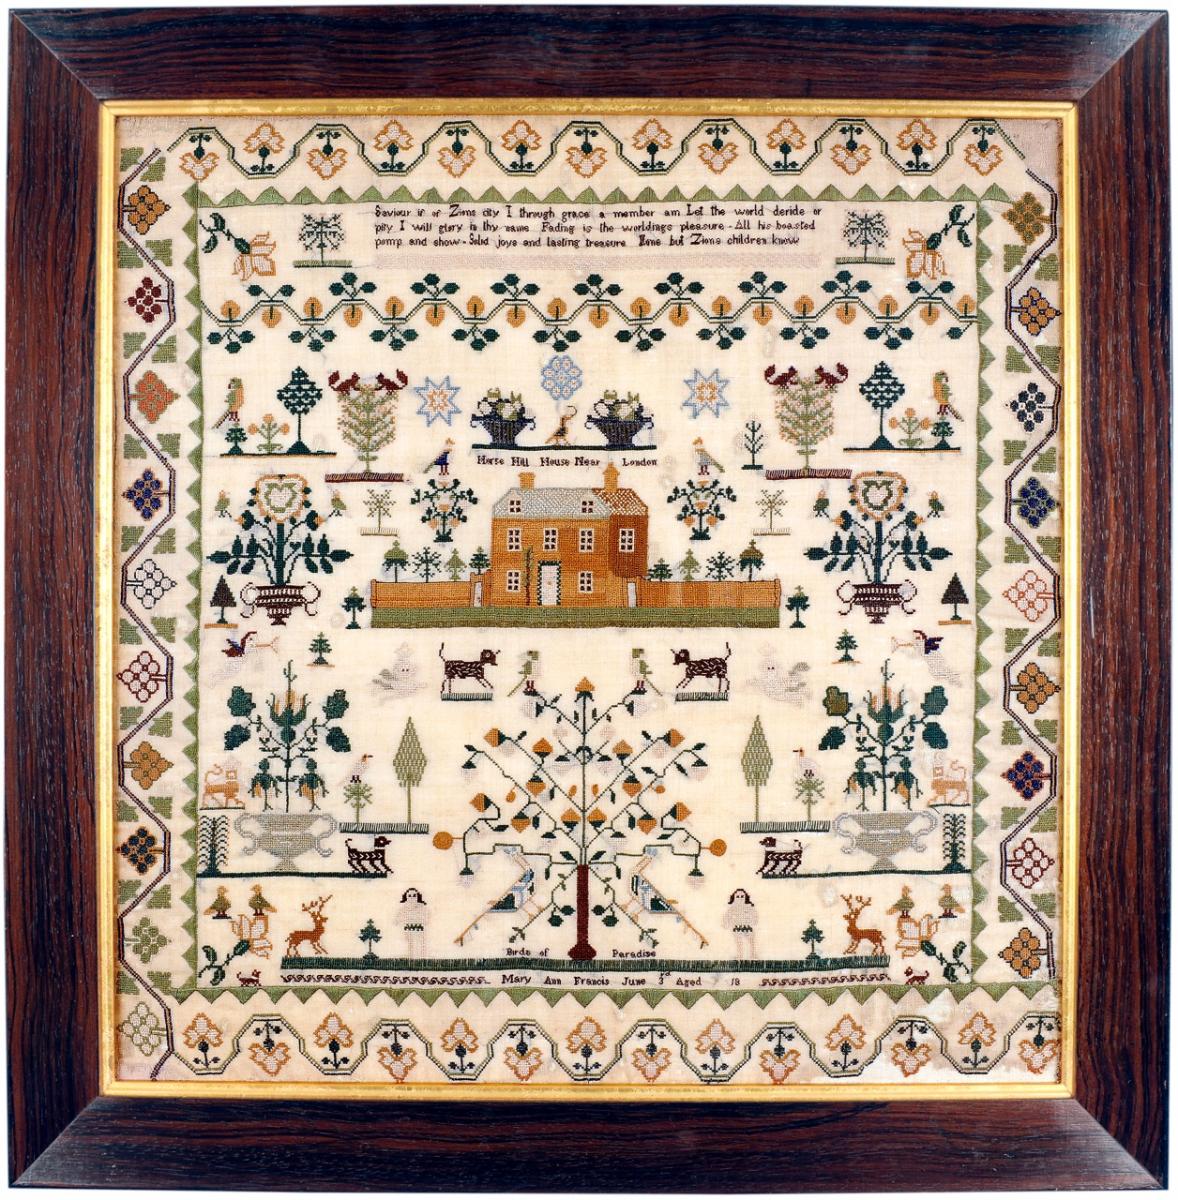 Immaculately worked sampler depicting Horse Hill House near London